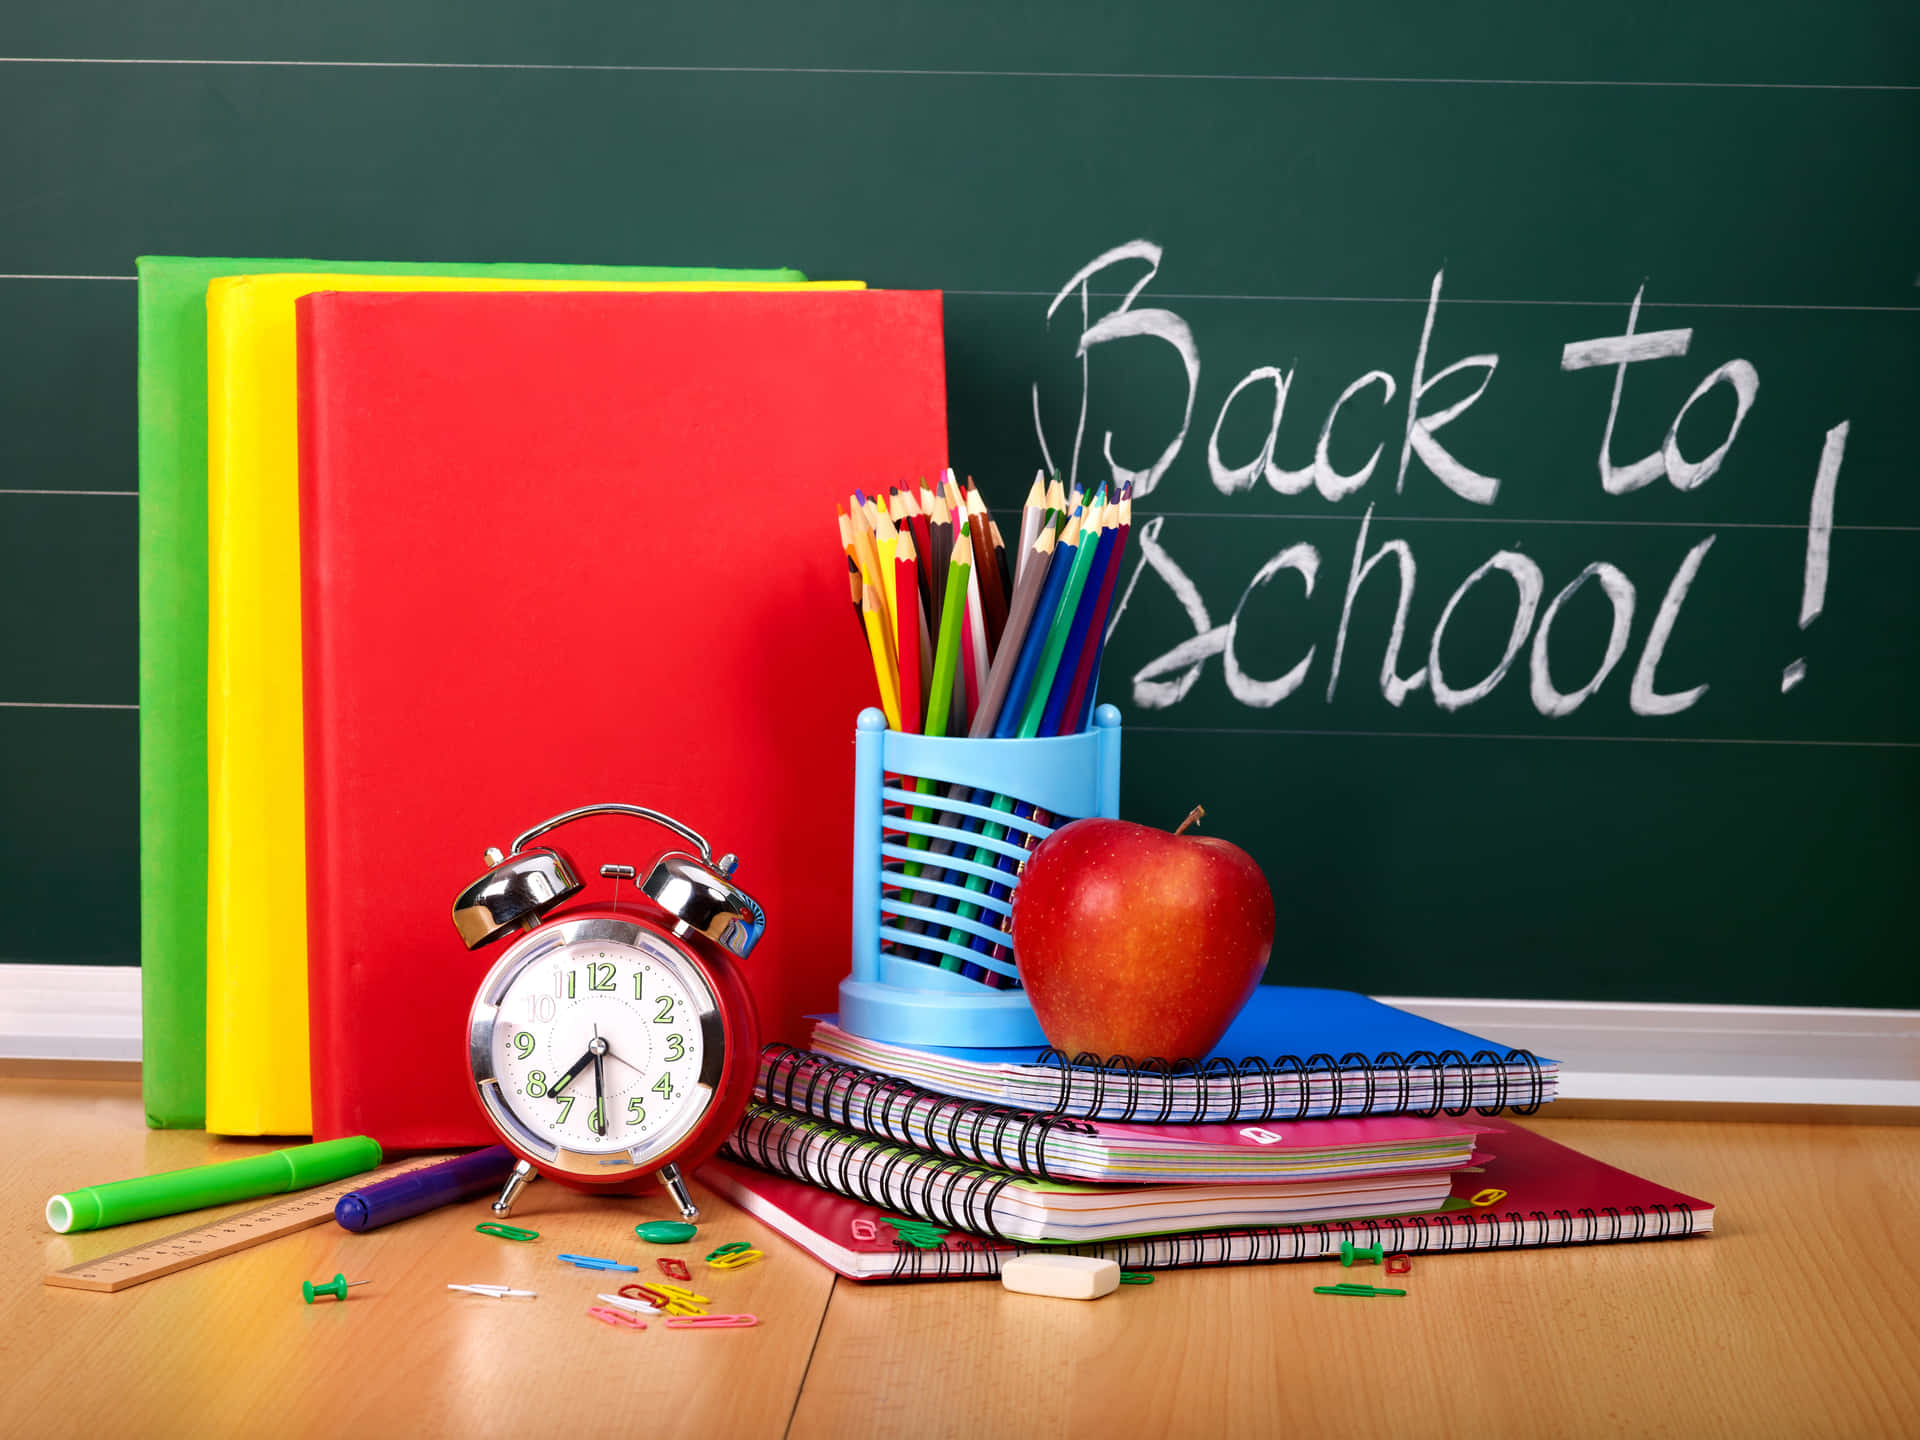 Back To School Background Wallpaper